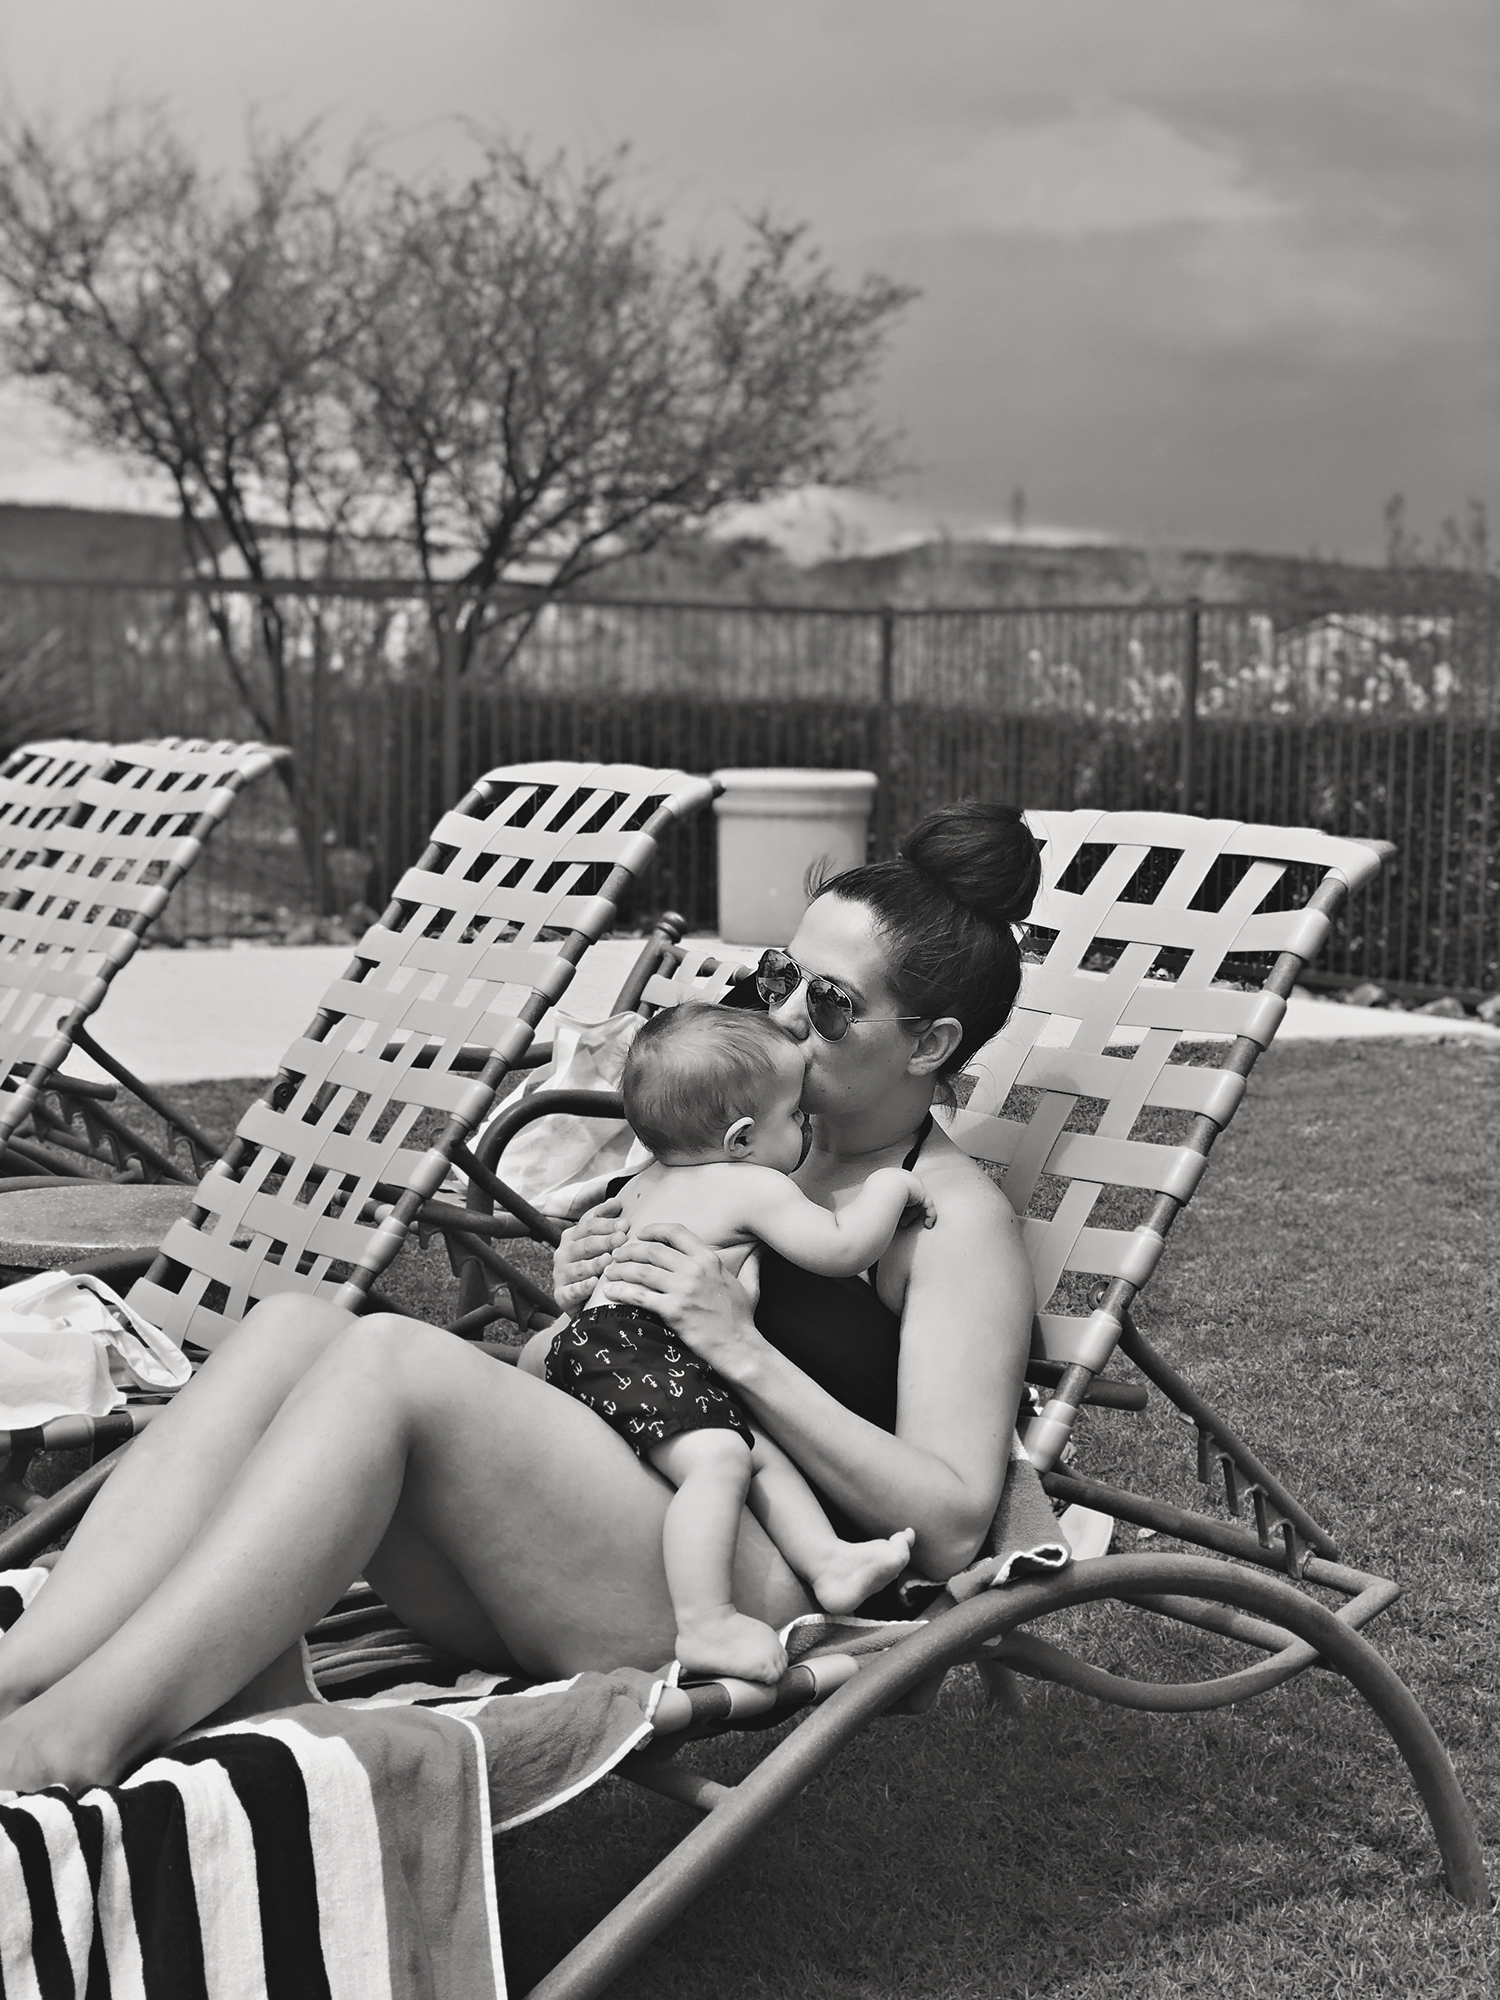 Pool days in the Arizona desert. A black and white collection of beating the triple degree heat and enjoying time with as a family. Desert living during the summer months at it's finest! #BlackAndWhitePhotography #Arizona #Phoenix #Poolside